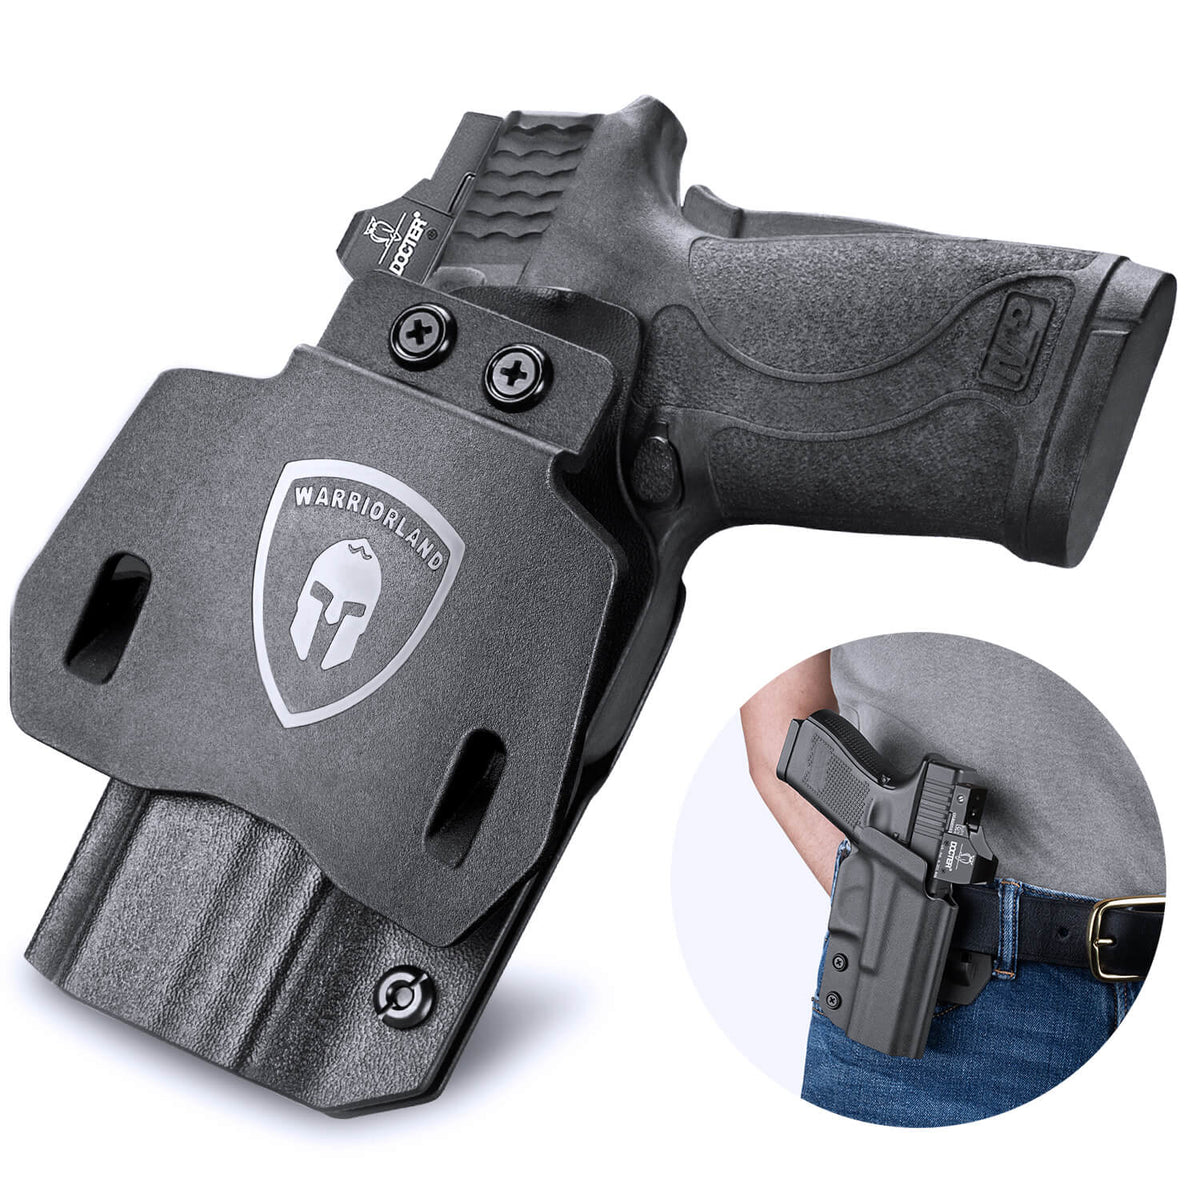 Kydex Appendix Open Carry OWB Paddle Holster with Red Dot Optics Cut for Smith & Wesson S&W M&P Shield 9mm 380 EZ Pistol Trigger Guard | WARRIORLAND